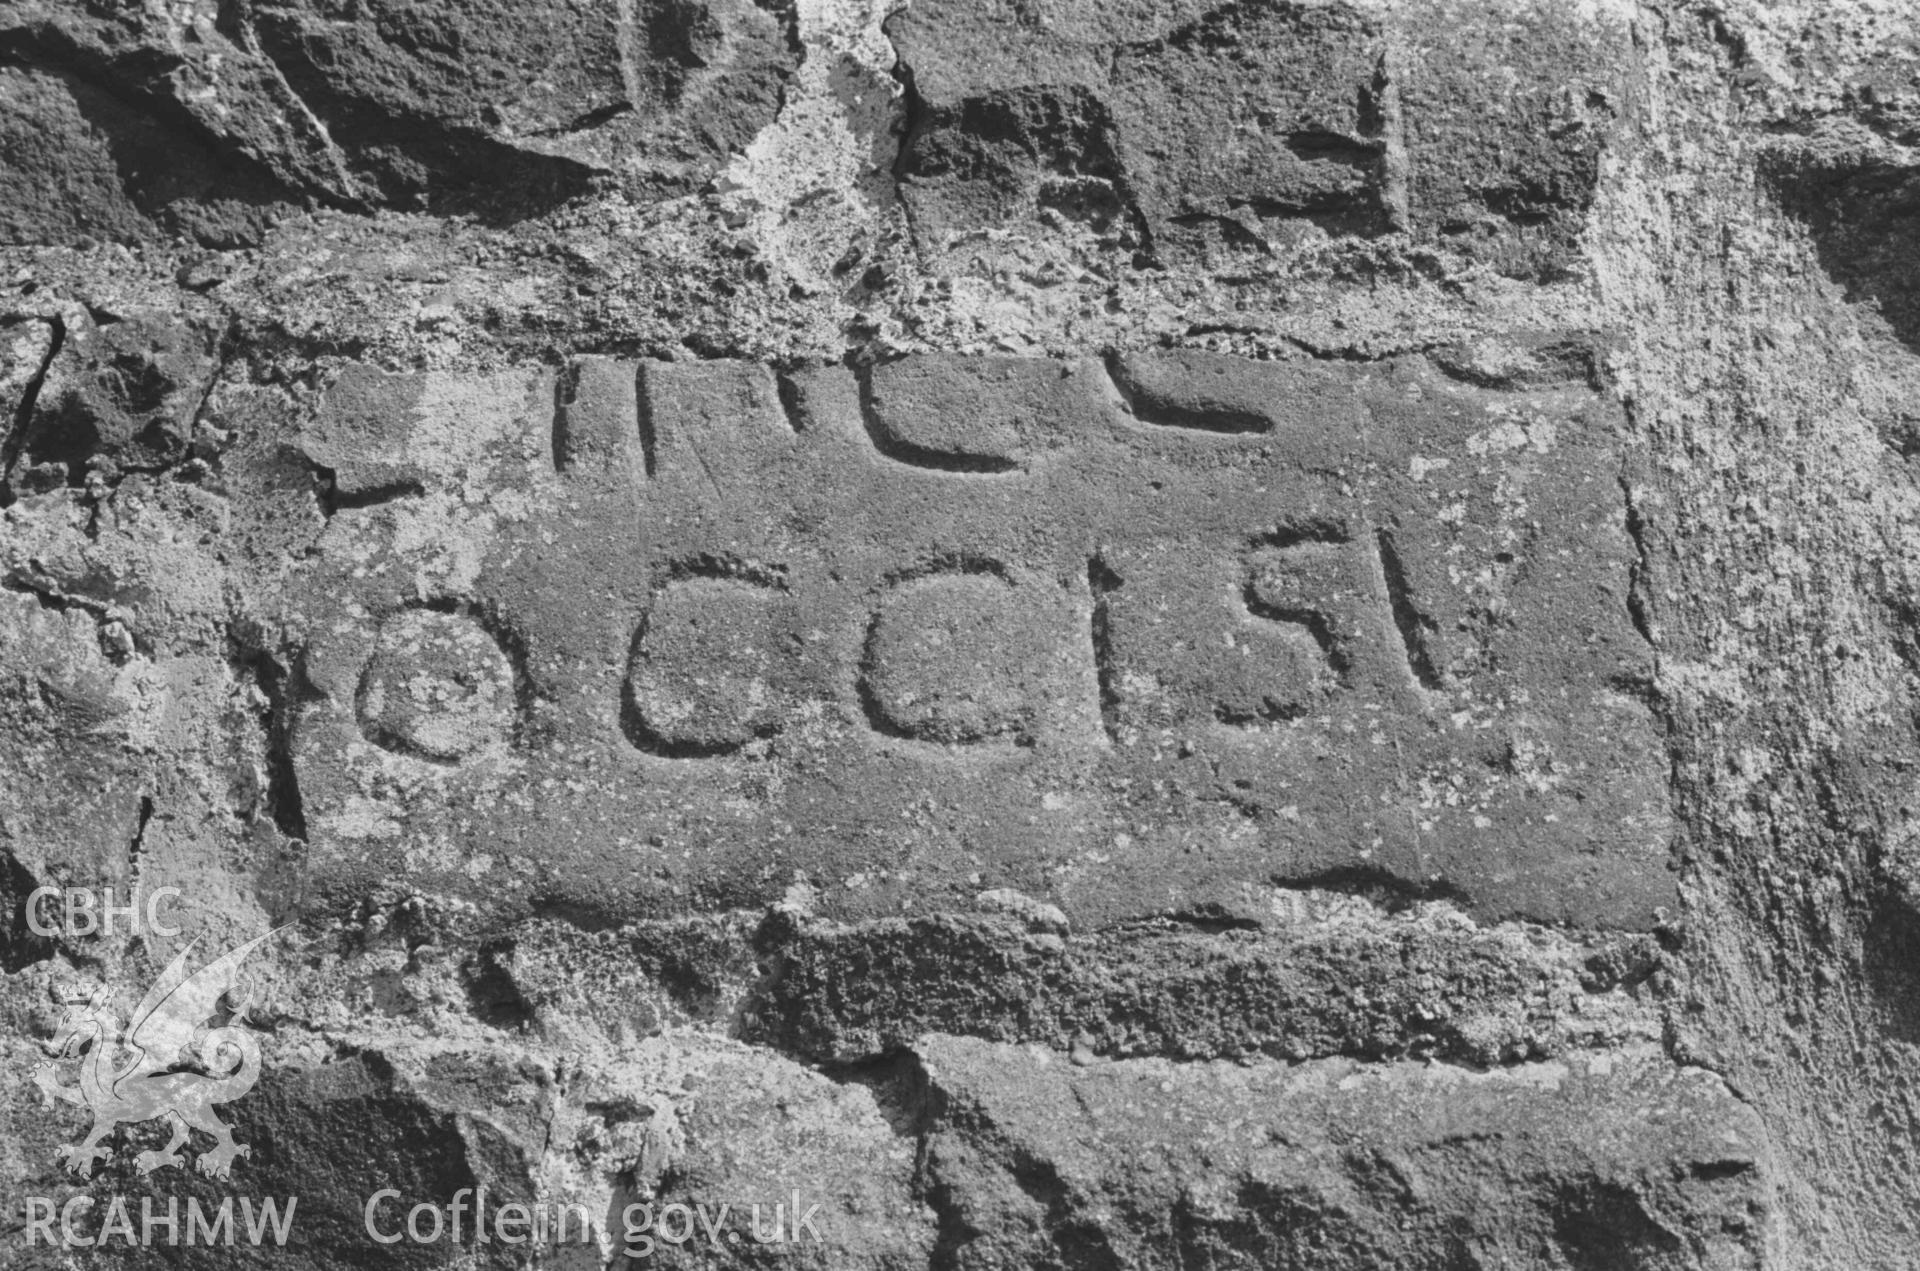 Digital copy of a black and white negative showing inscribed stones set in the west wall of the church at Llanddewi-Brefi. Photographed by Arthur Chater on 22 August 1968. Grid Reference SN 664 553.